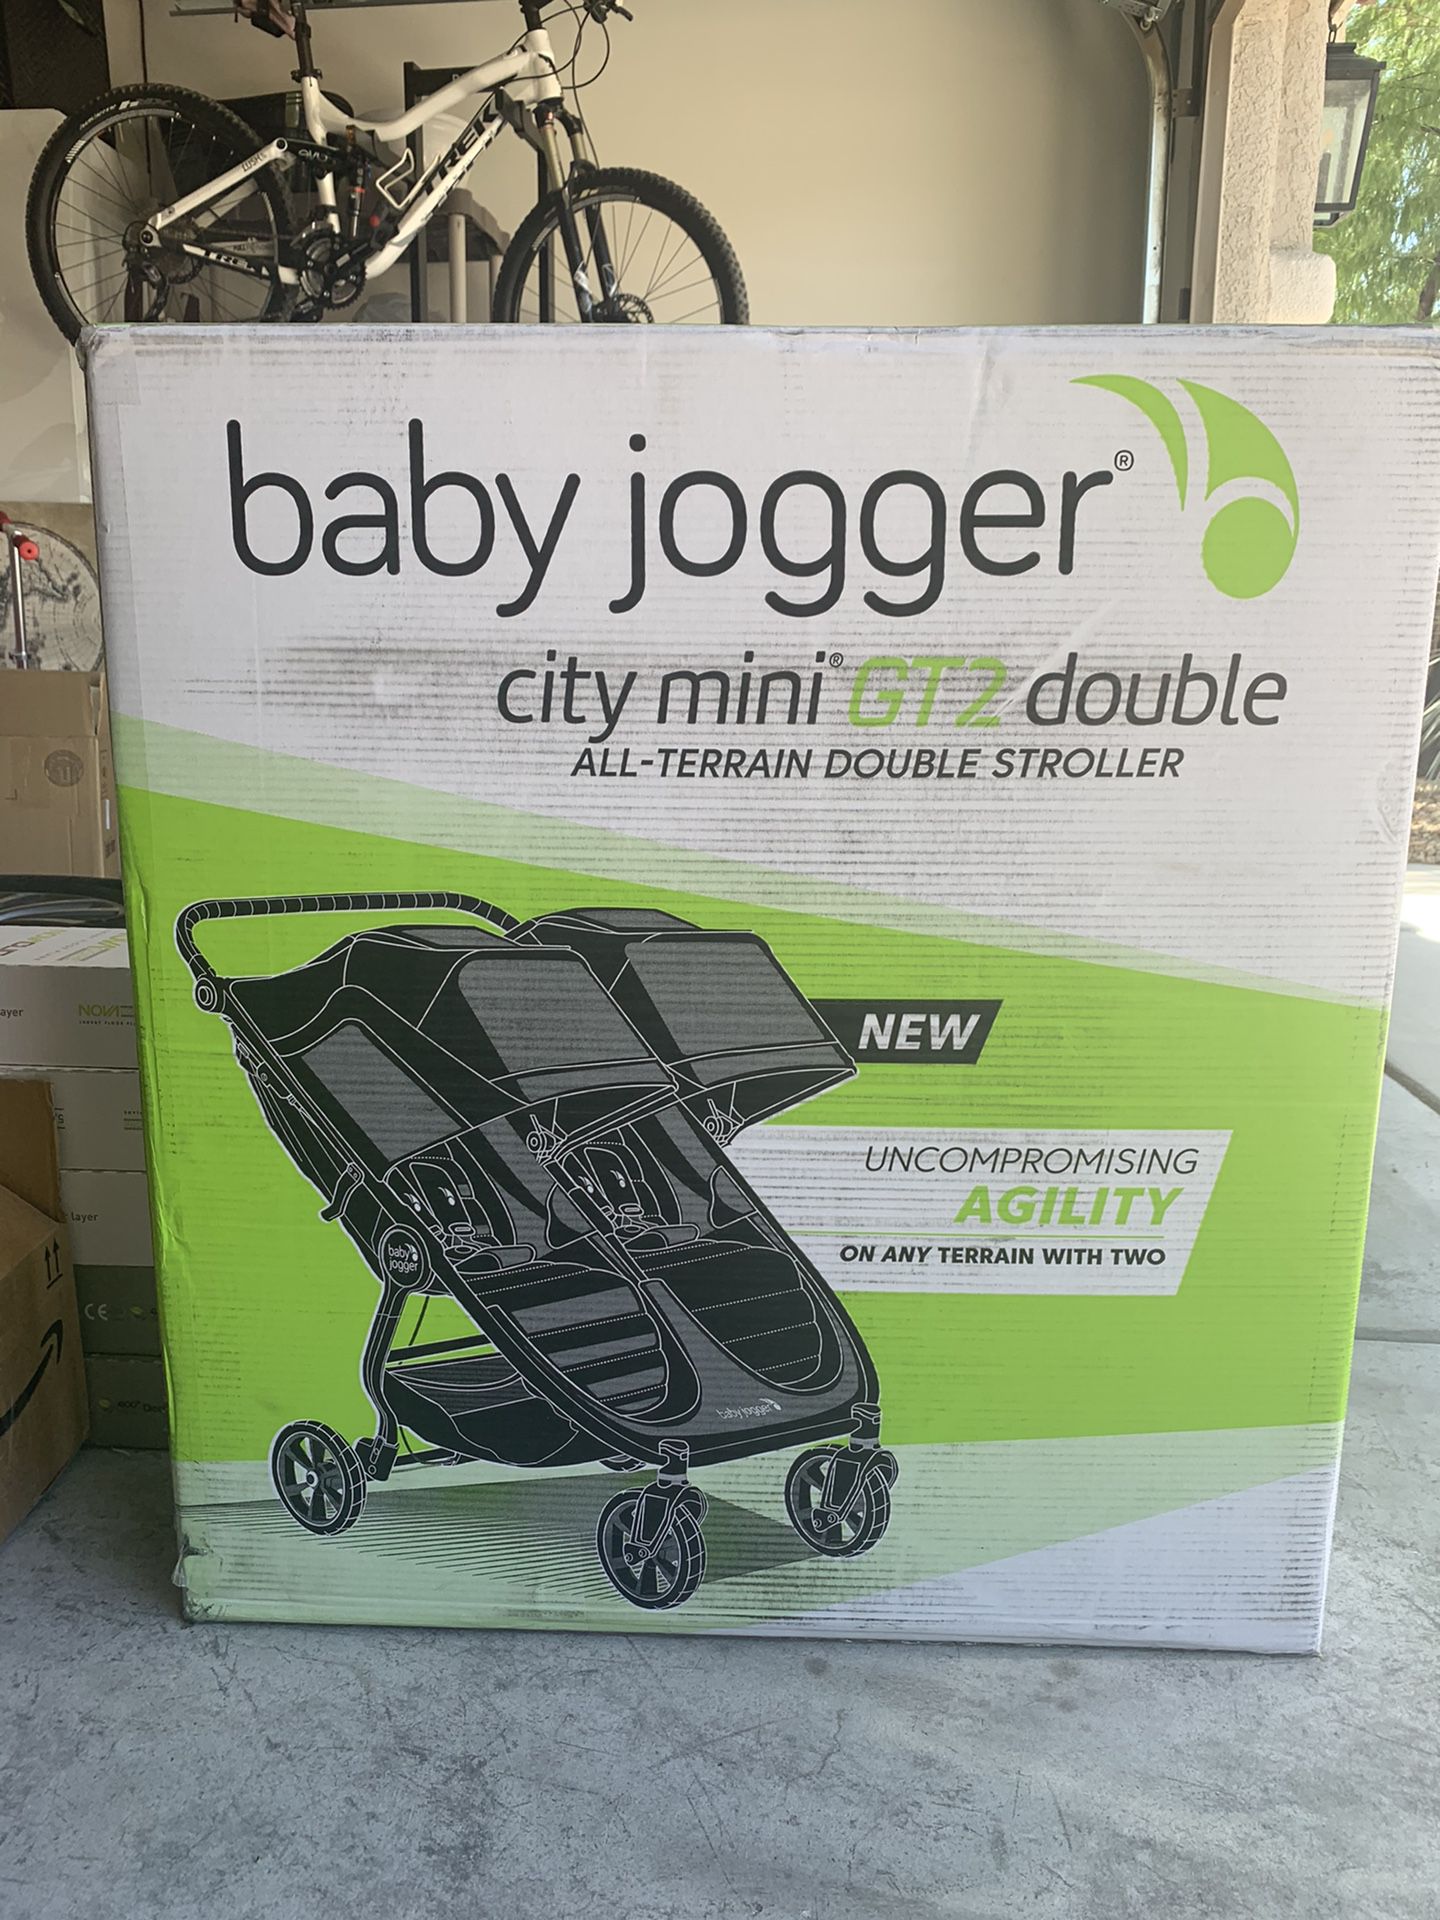 New in box baby jogger city mini GT2 double stroller